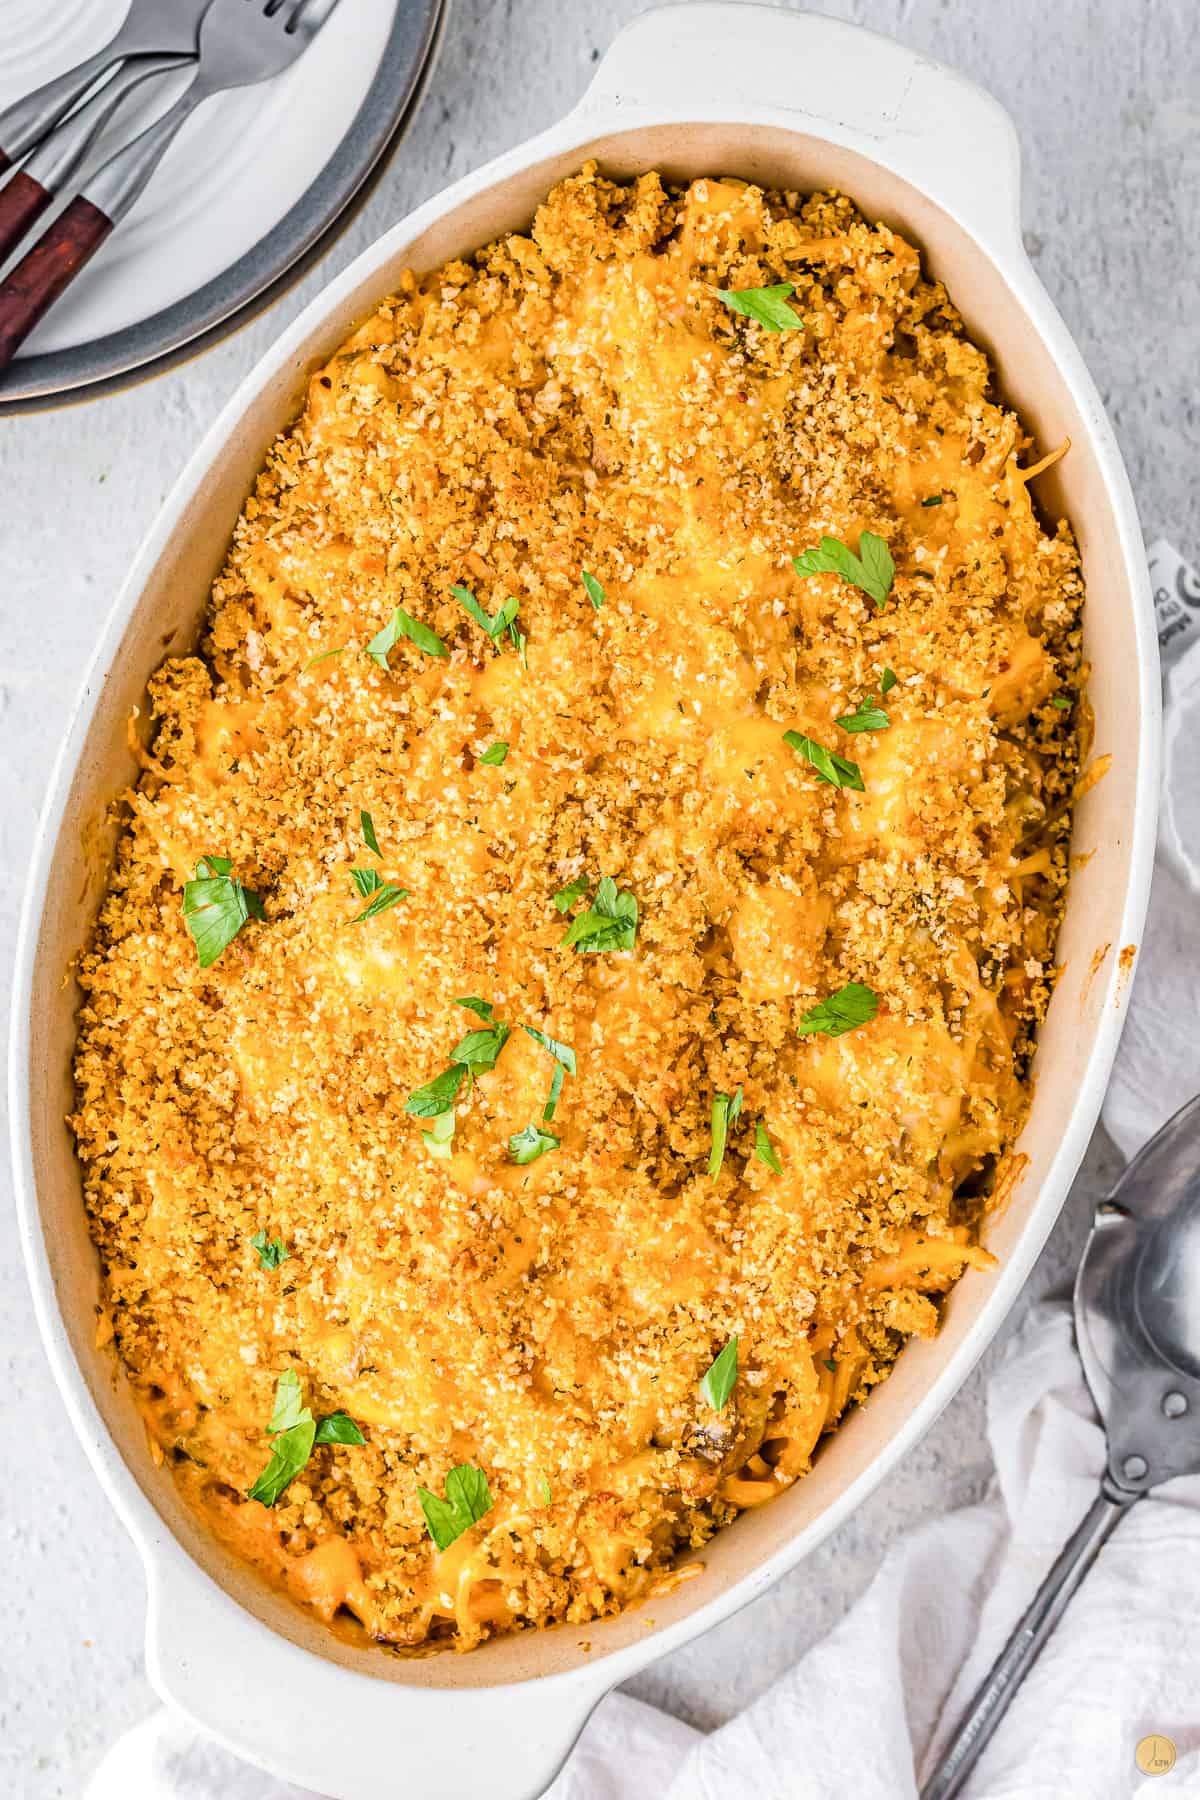 baked chicken tetrazzini in a while baking dish